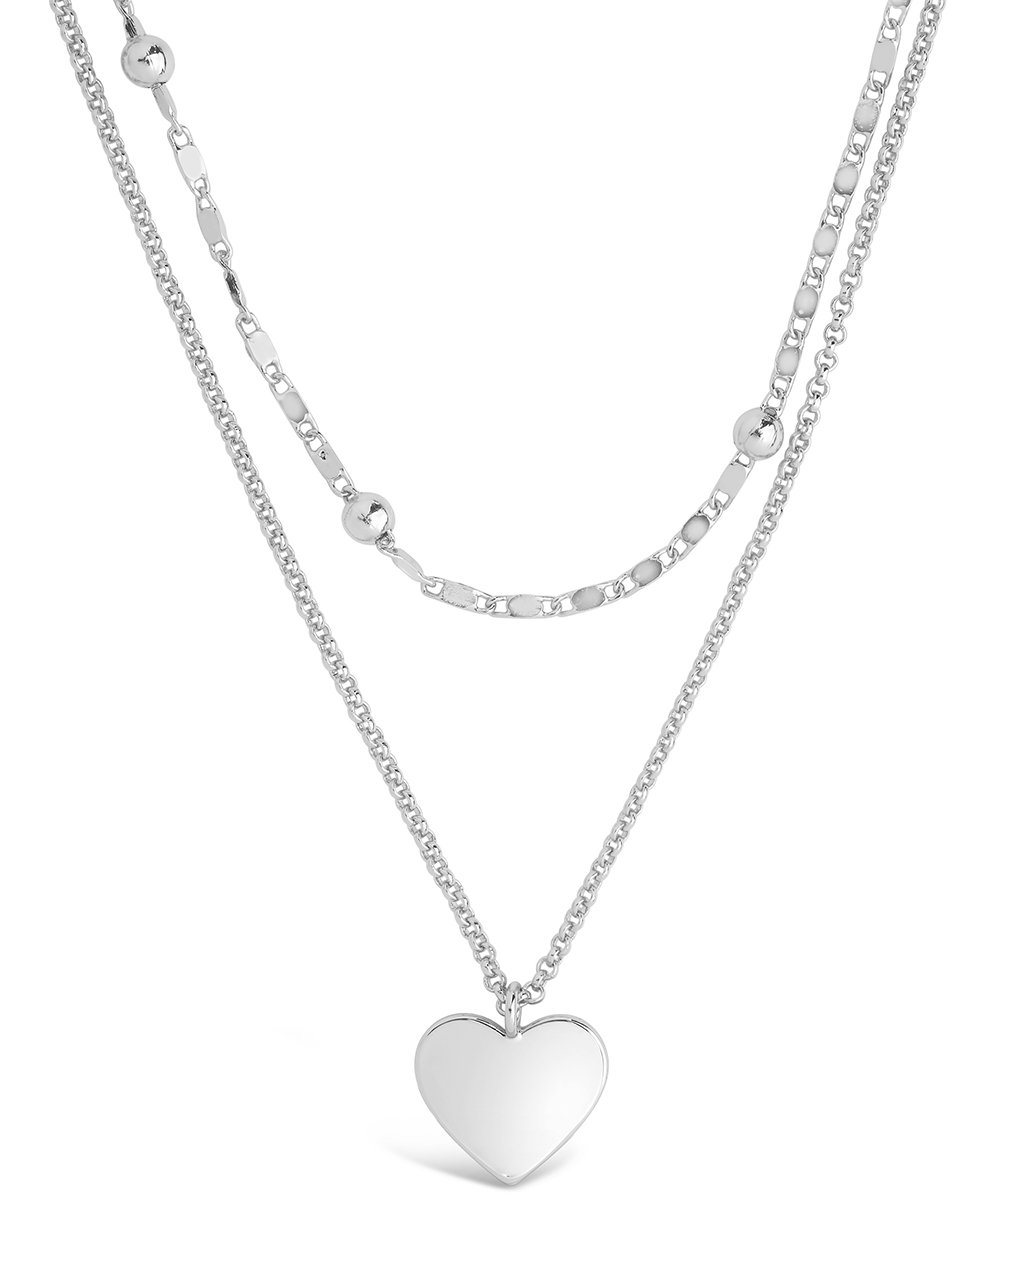 Sterling Silver Necklace Extender with Heart Charm. Layered